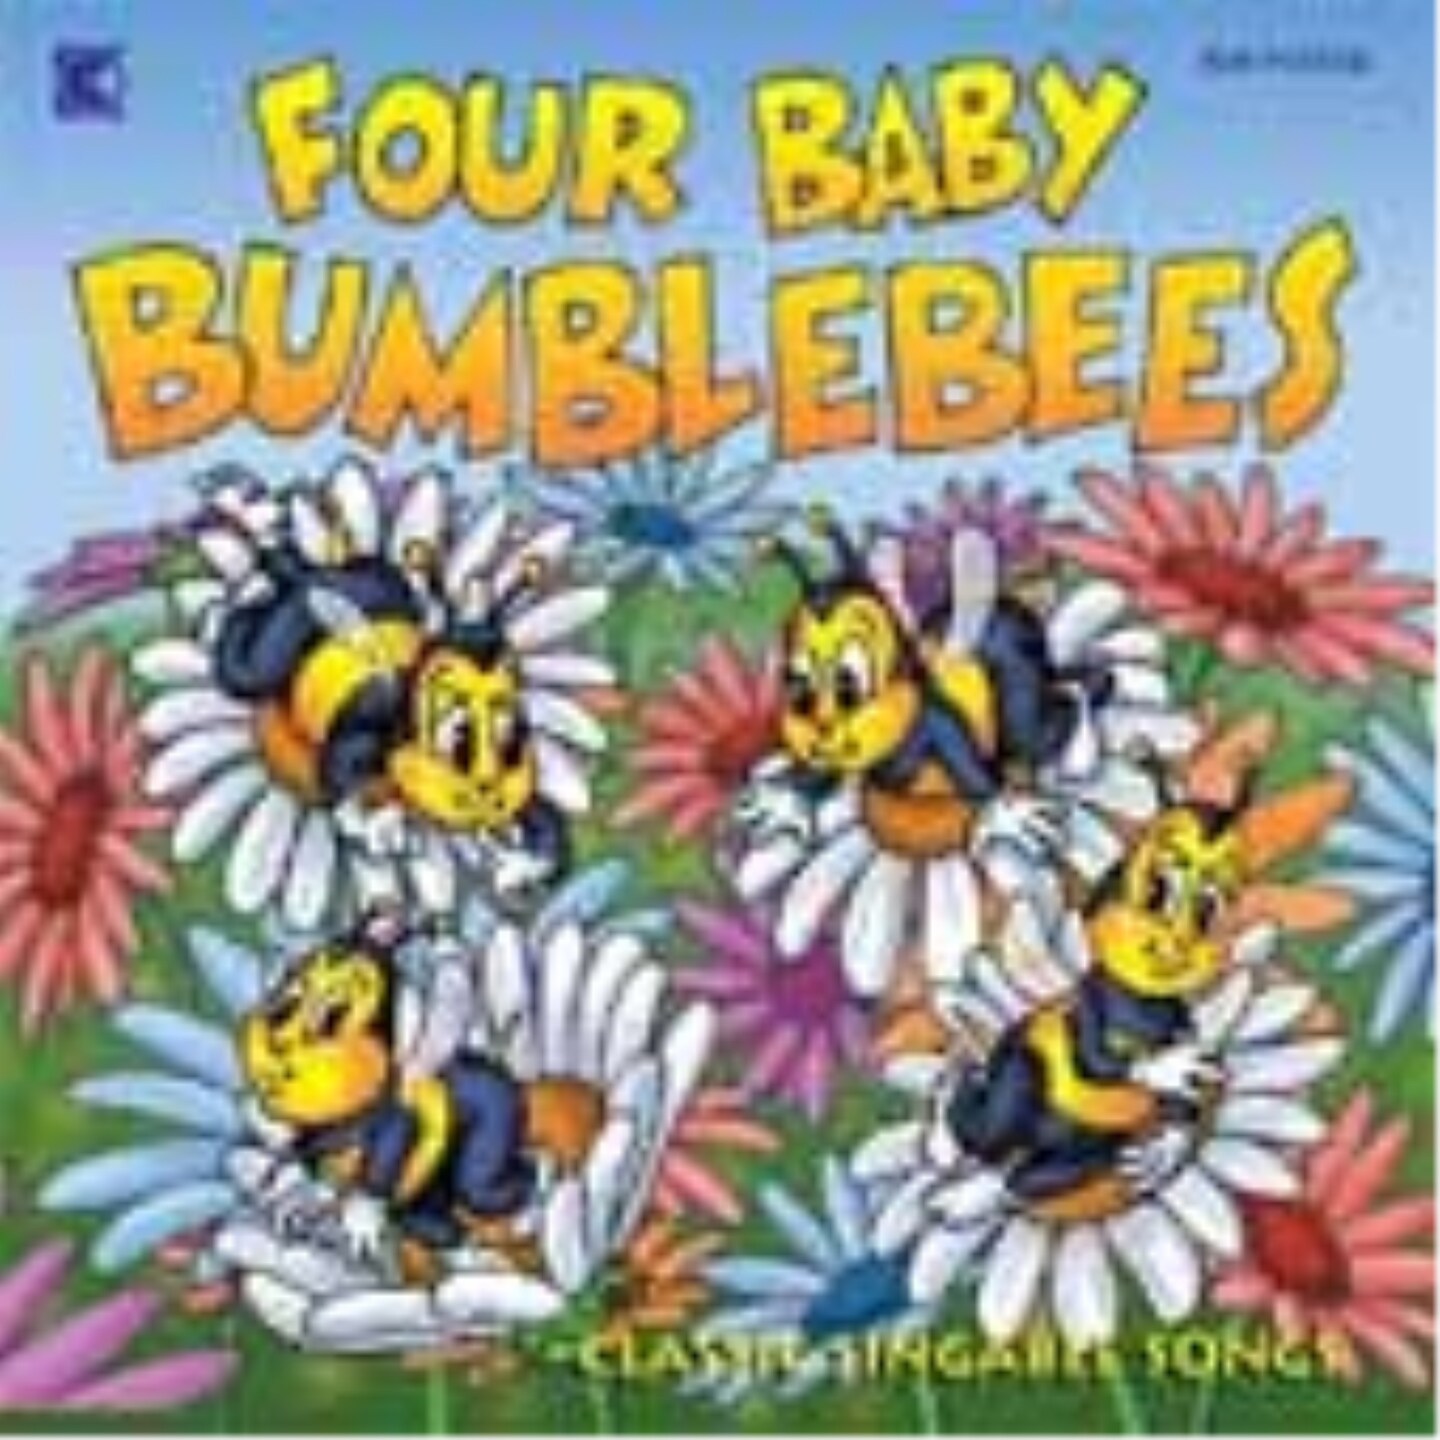 Four Baby Bumblebees Educational CD